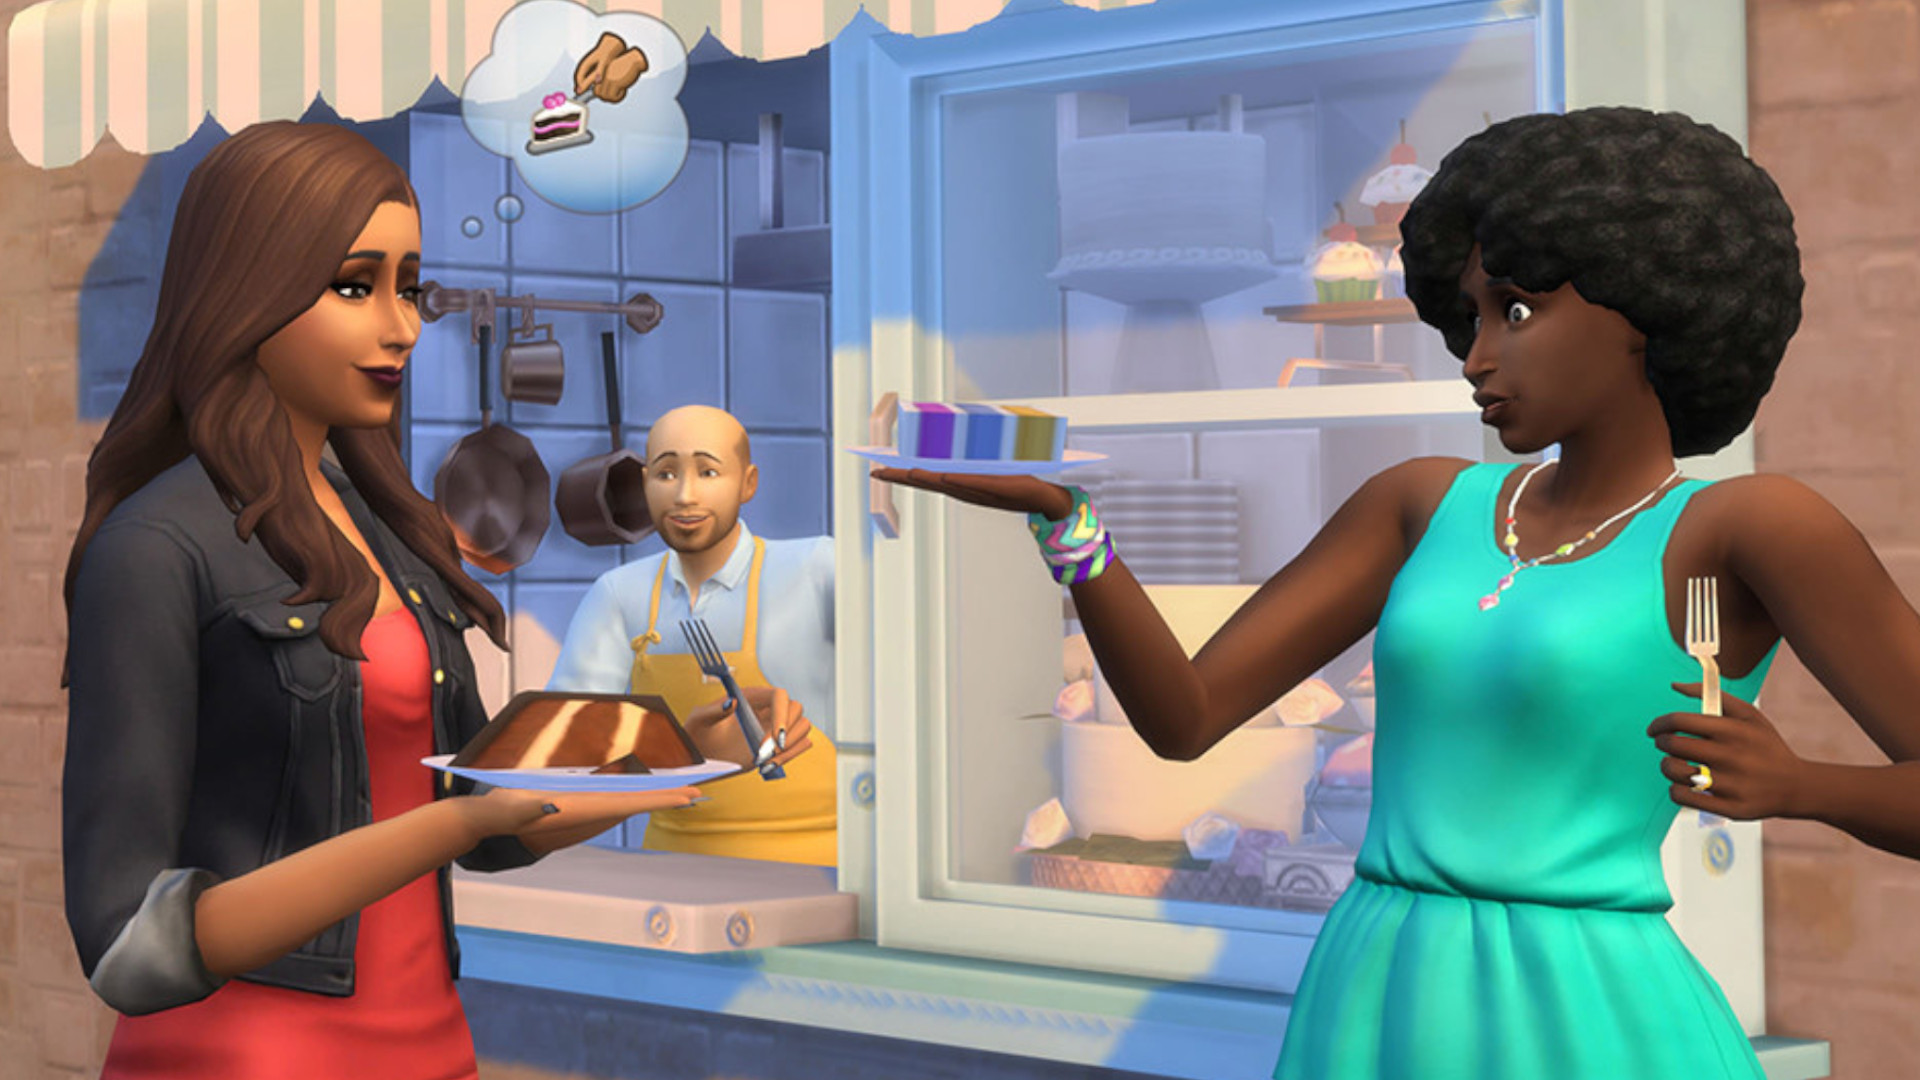 Maxis wants your Sims 4 saves to fix error code 0